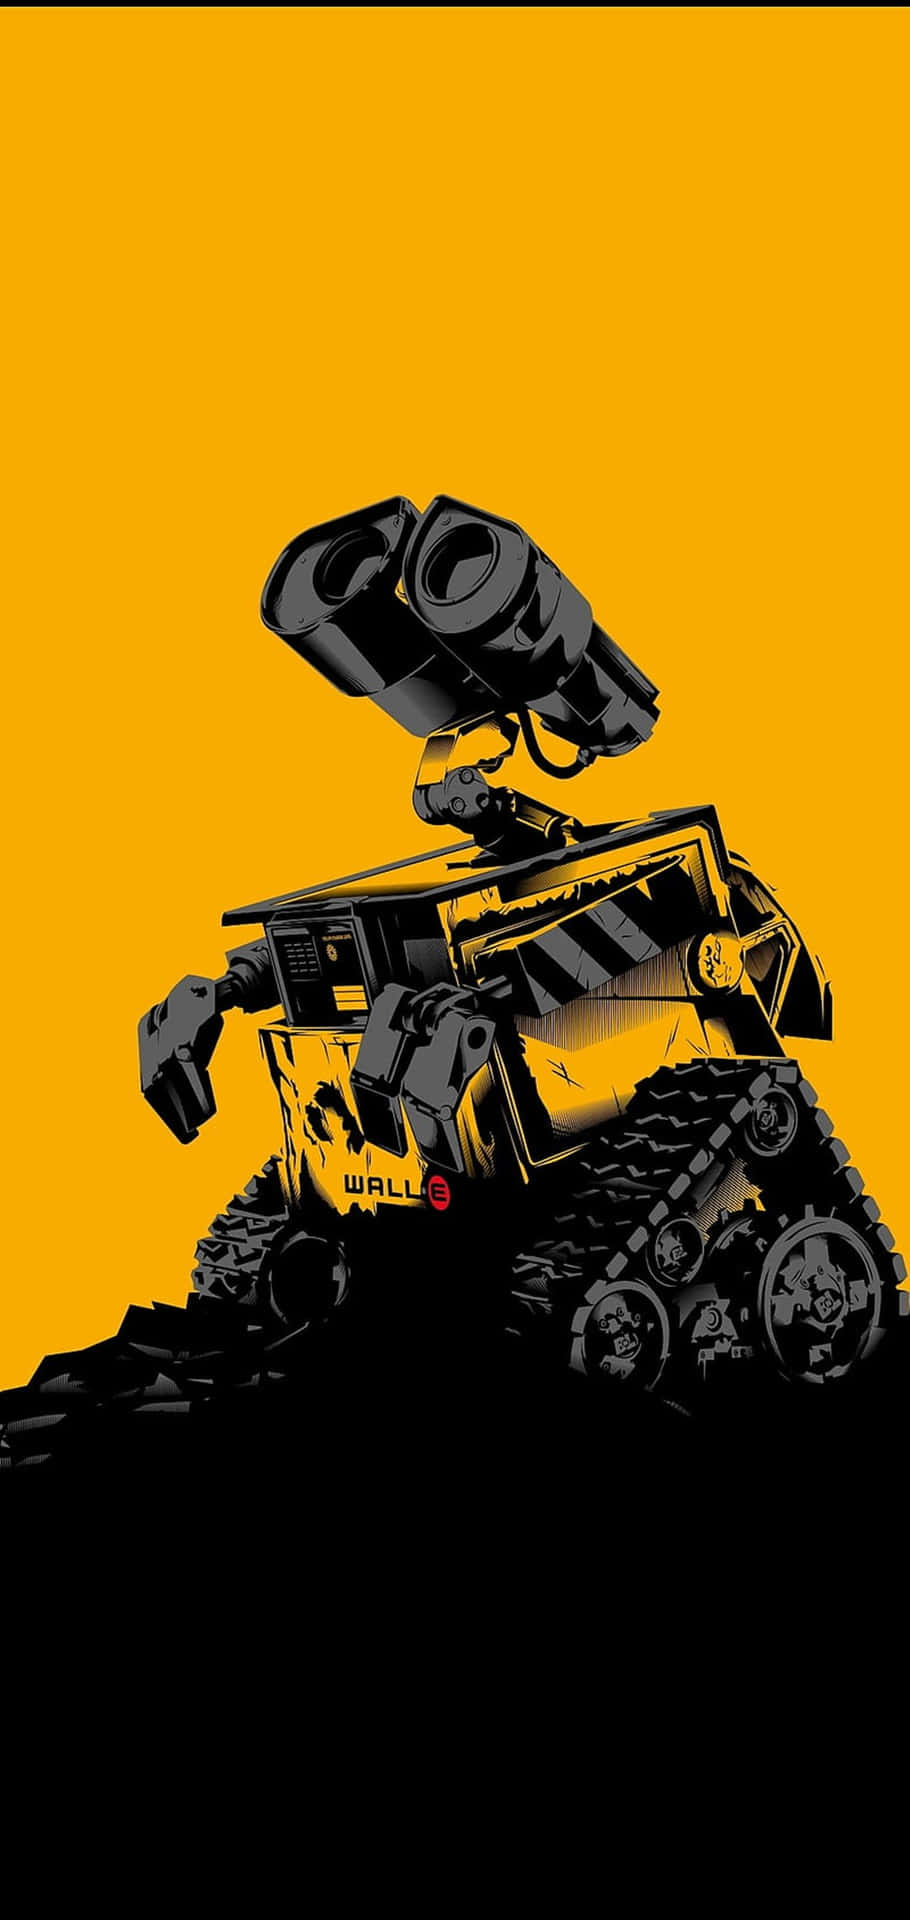 A Black And Yellow Vehicle With A Gun On It Wallpaper